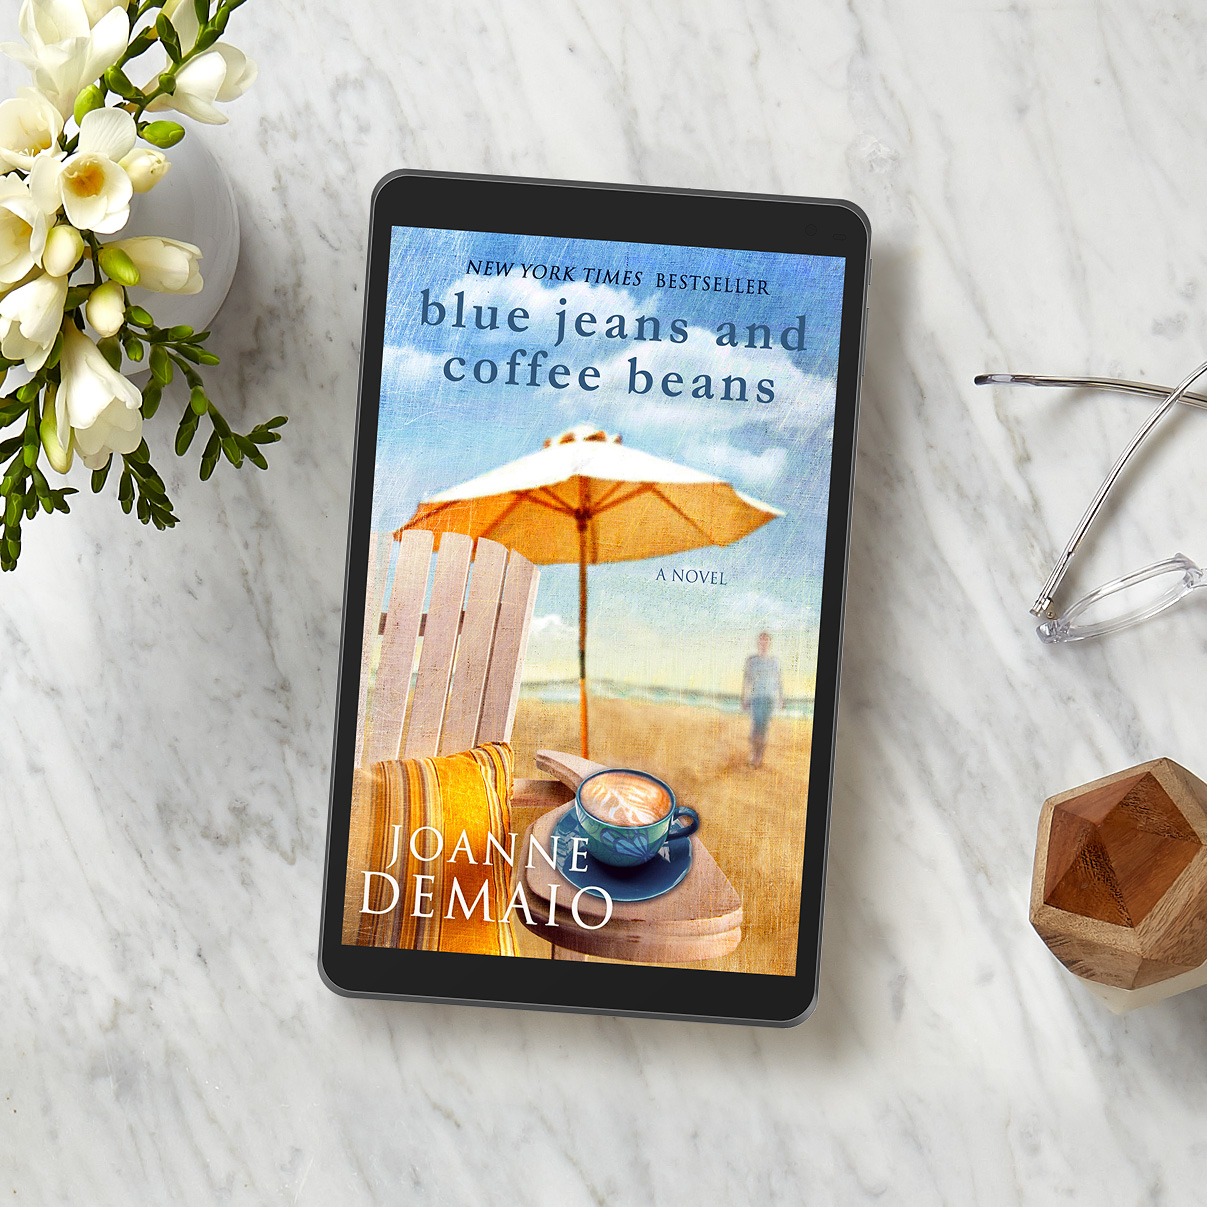 Flatlay of a table with a NOOK tablet device showing the cover of "Blue Jeans and Coffee Beans" 